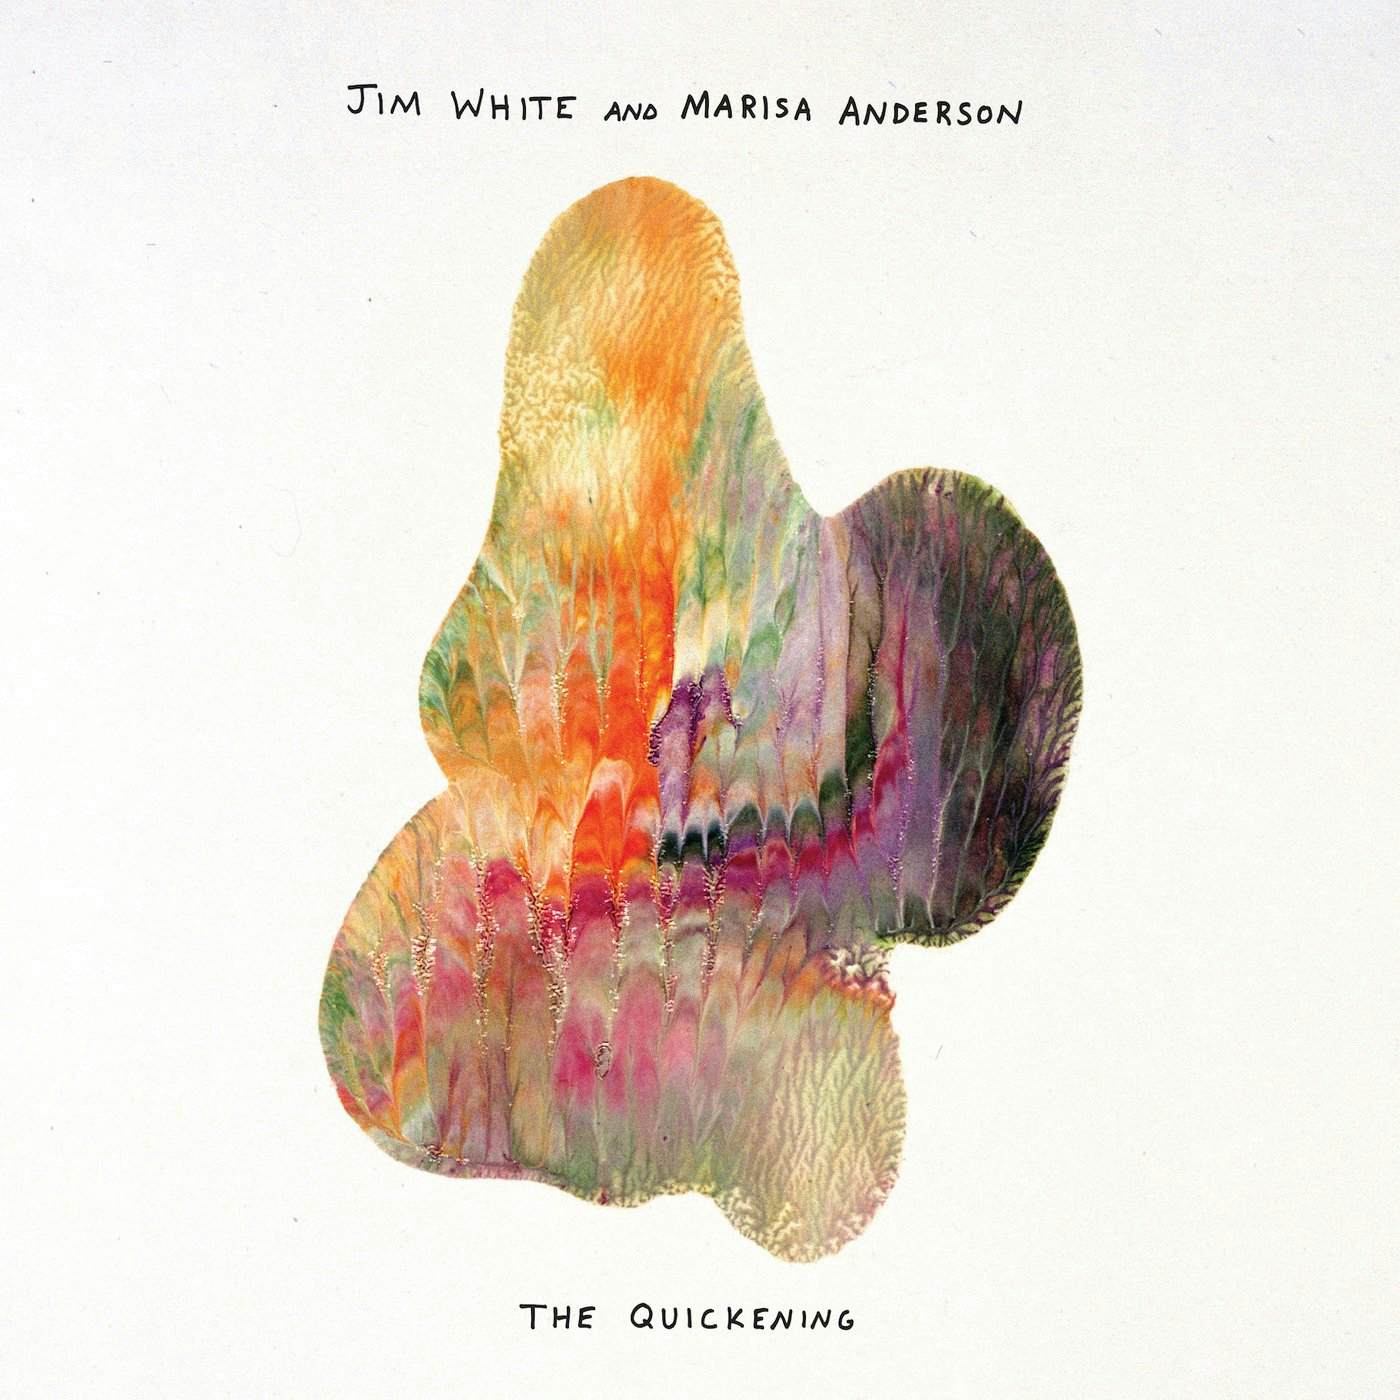 Jim White and Marisa Anderson / The Quickening - Translucent Green LP Vinyl